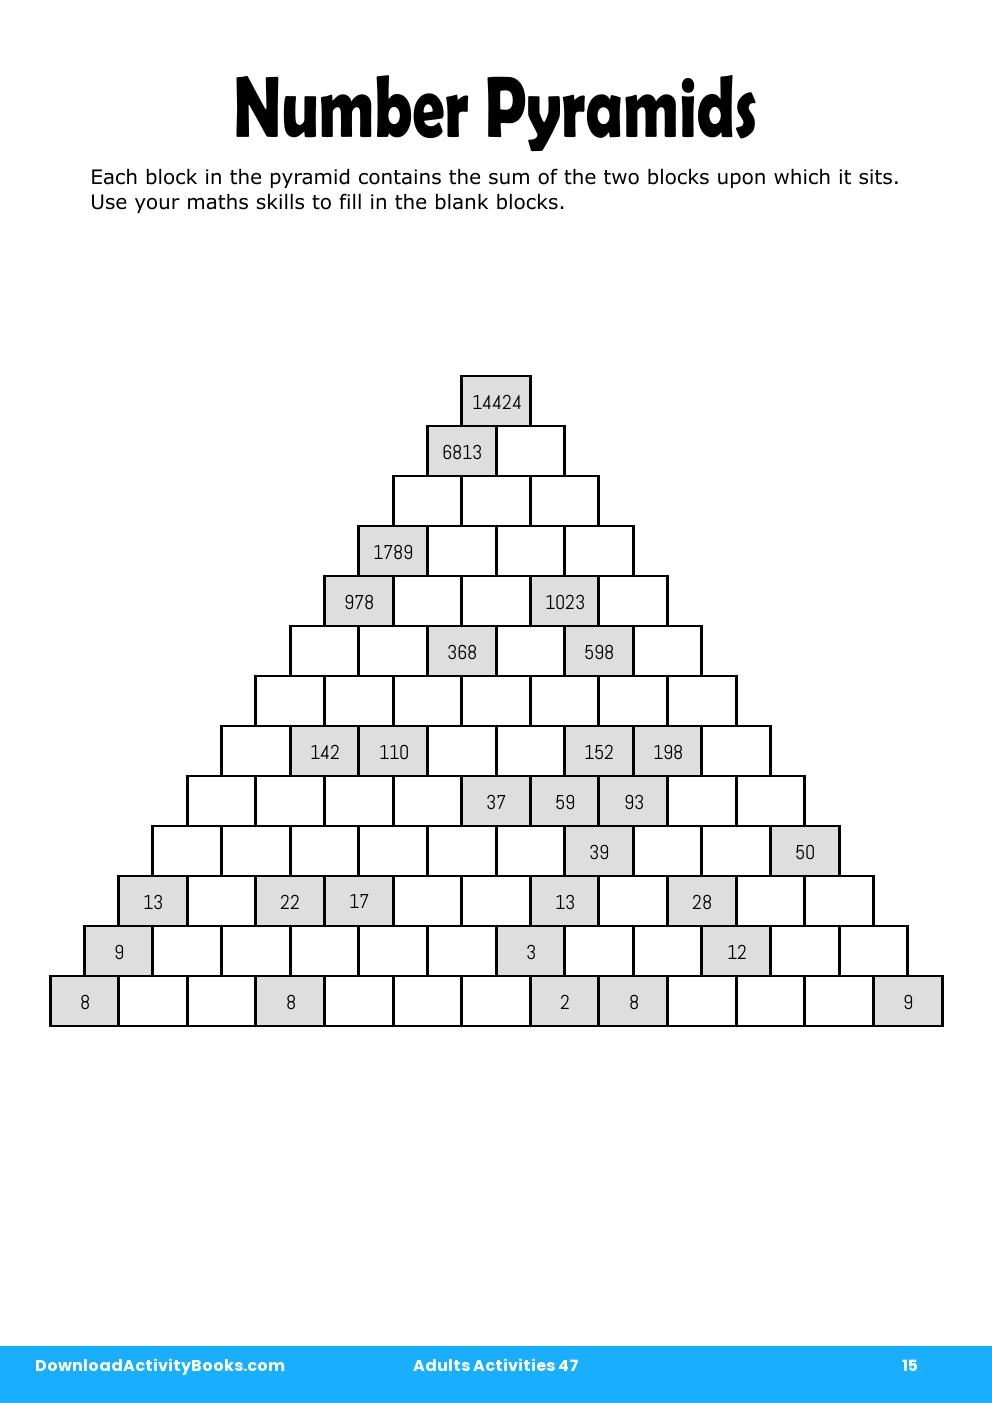 Number Pyramids in Adults Activities 47